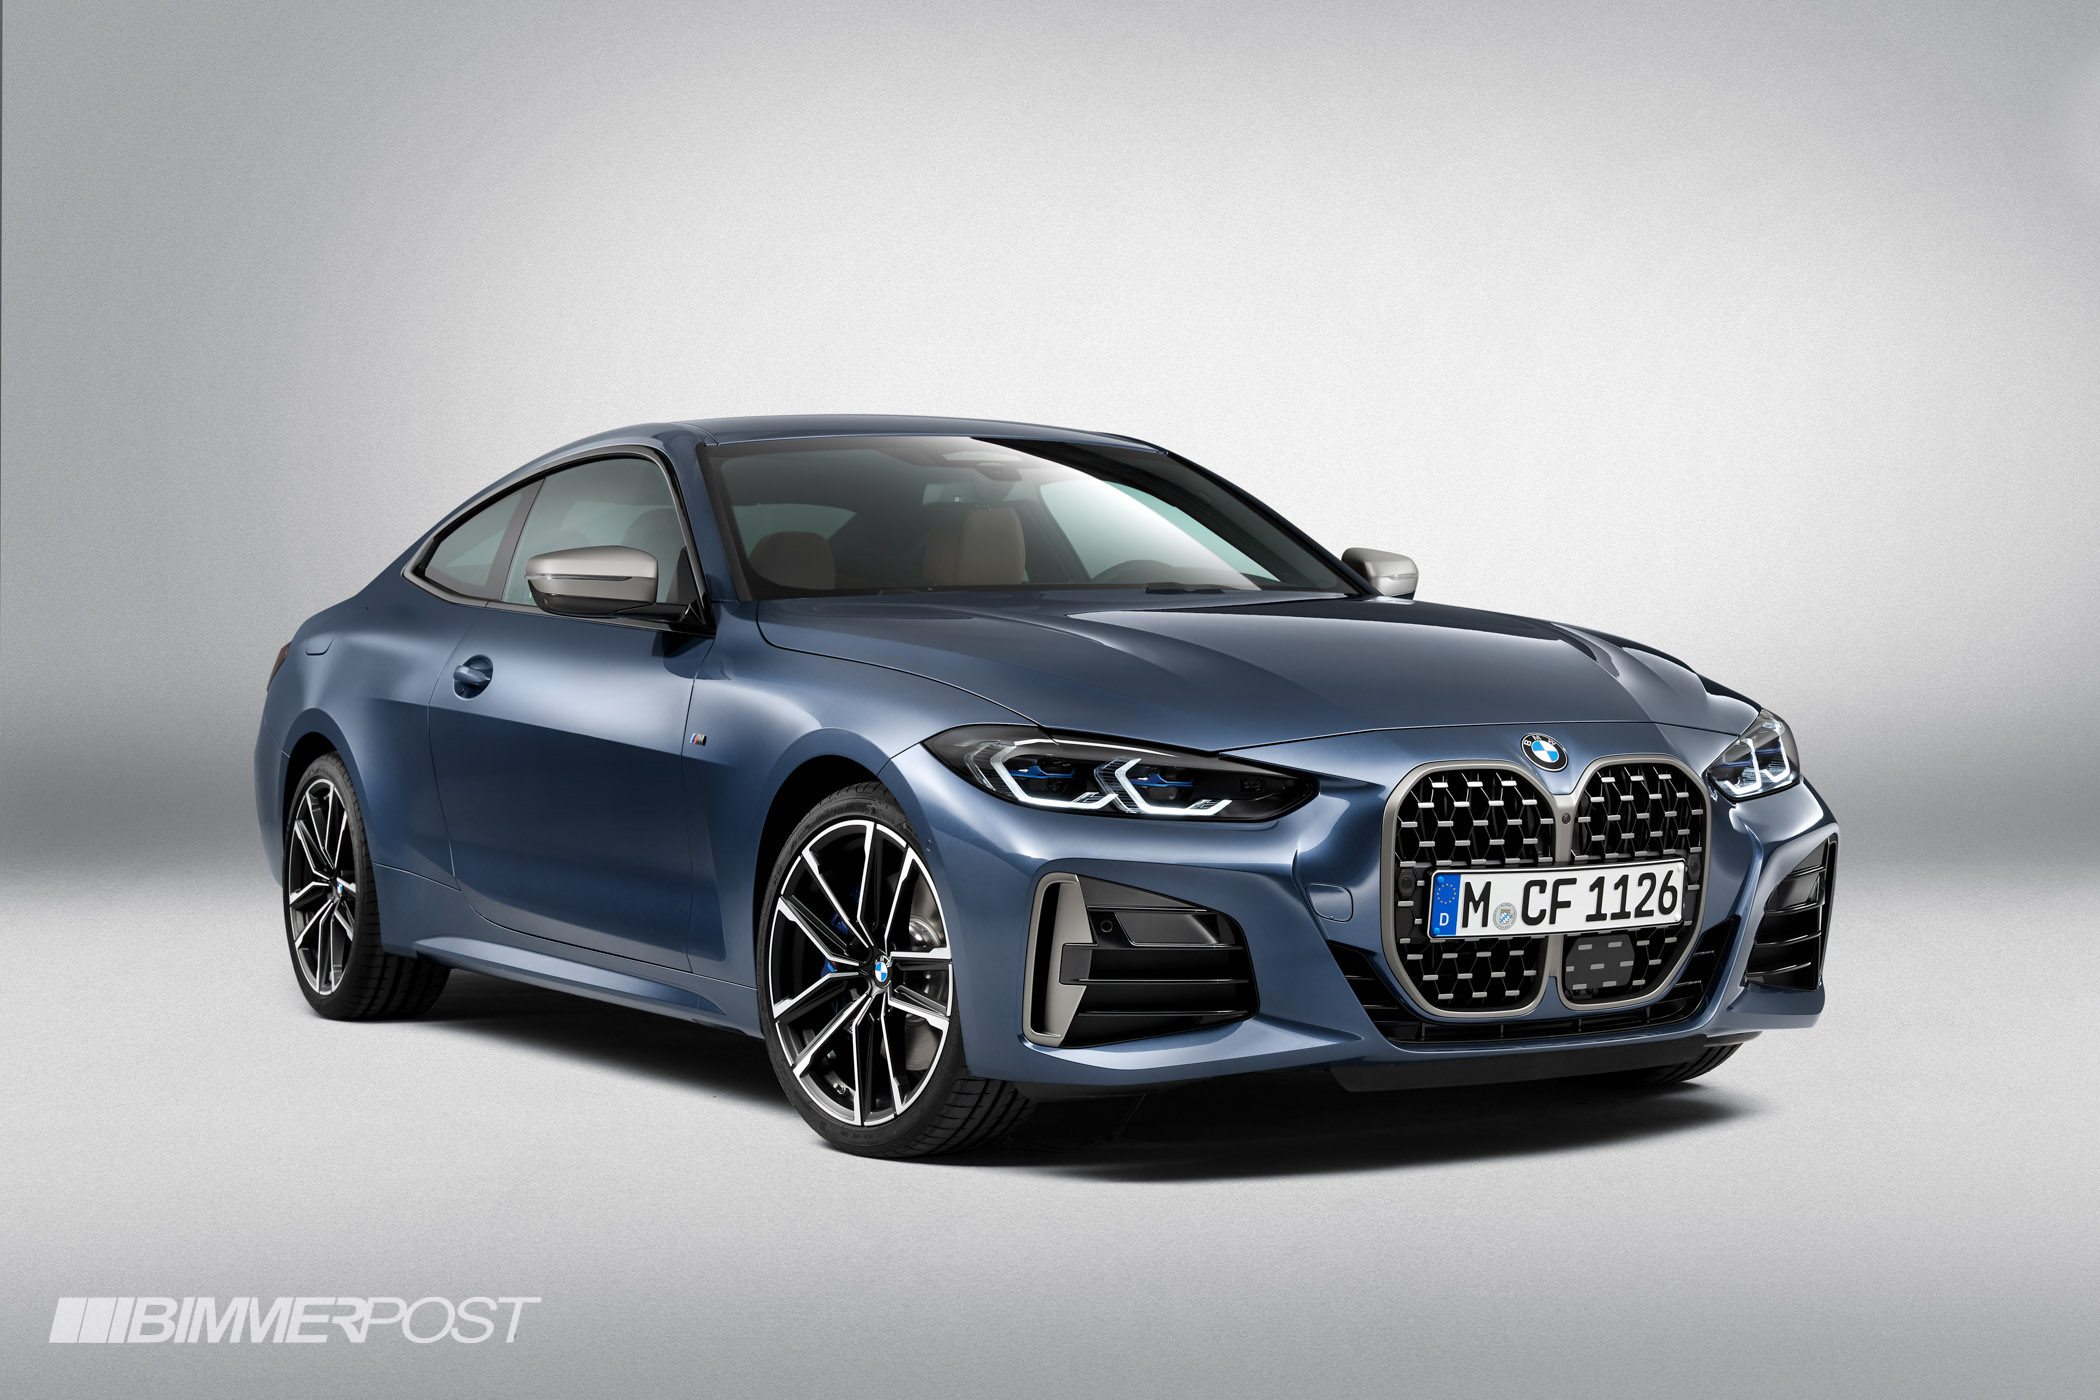 2021+ BMW 4 Series G22 (430i, M440i) Official Specs, Wallpapers, Videos